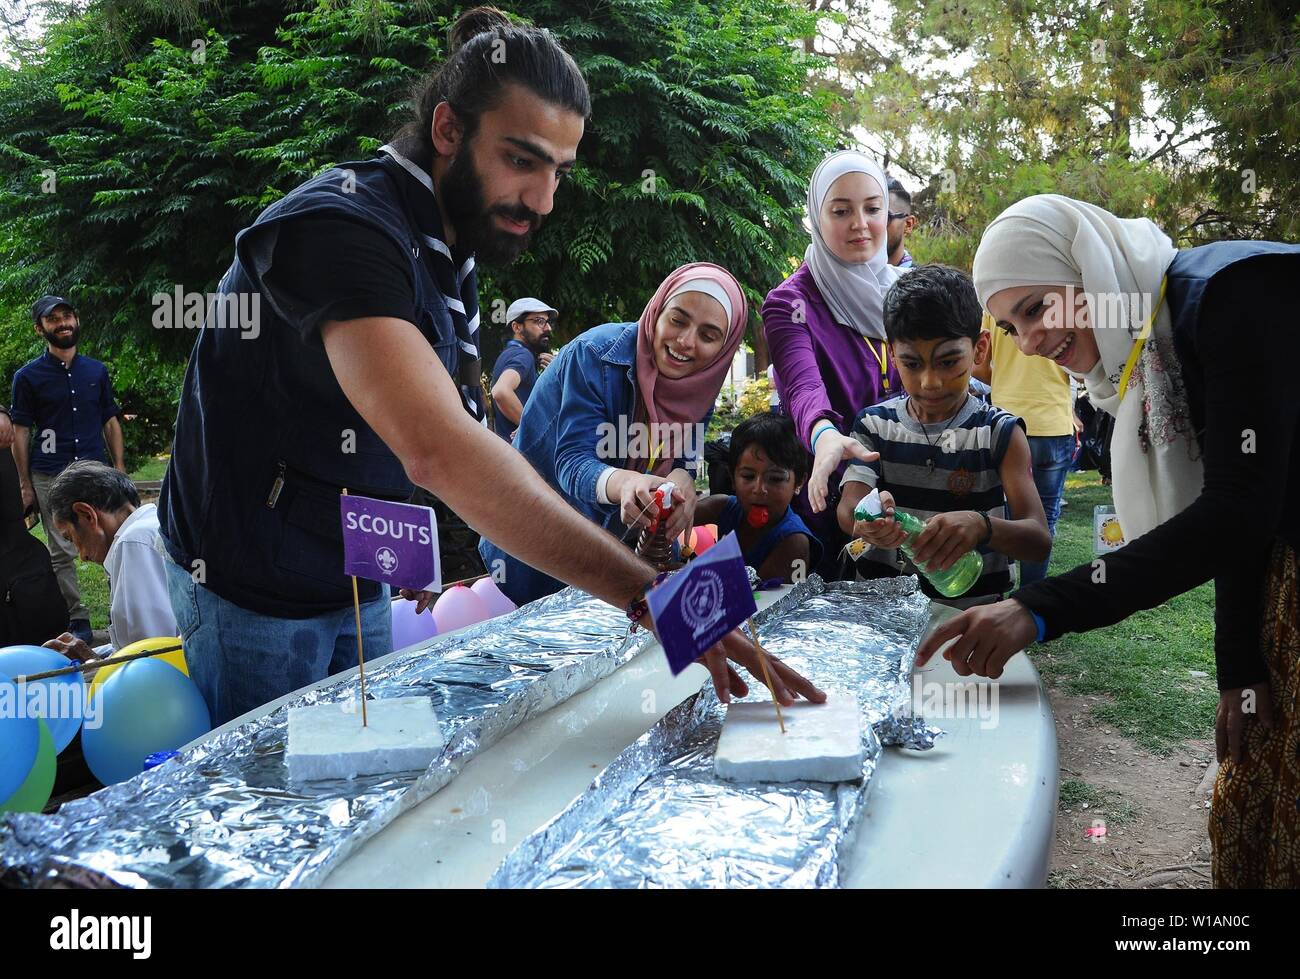 Damascus, Syria. 1st July, 2019. Homeless Syrian kids participate in activities organized by the Sayyar Initiative in Damascus, Syria, on July 1, 2019. The activities were held to make homeless Syrian kids feel loved and accepted in the society. Credit: Ammar Safarjalani/Xinhua/Alamy Live News Stock Photo